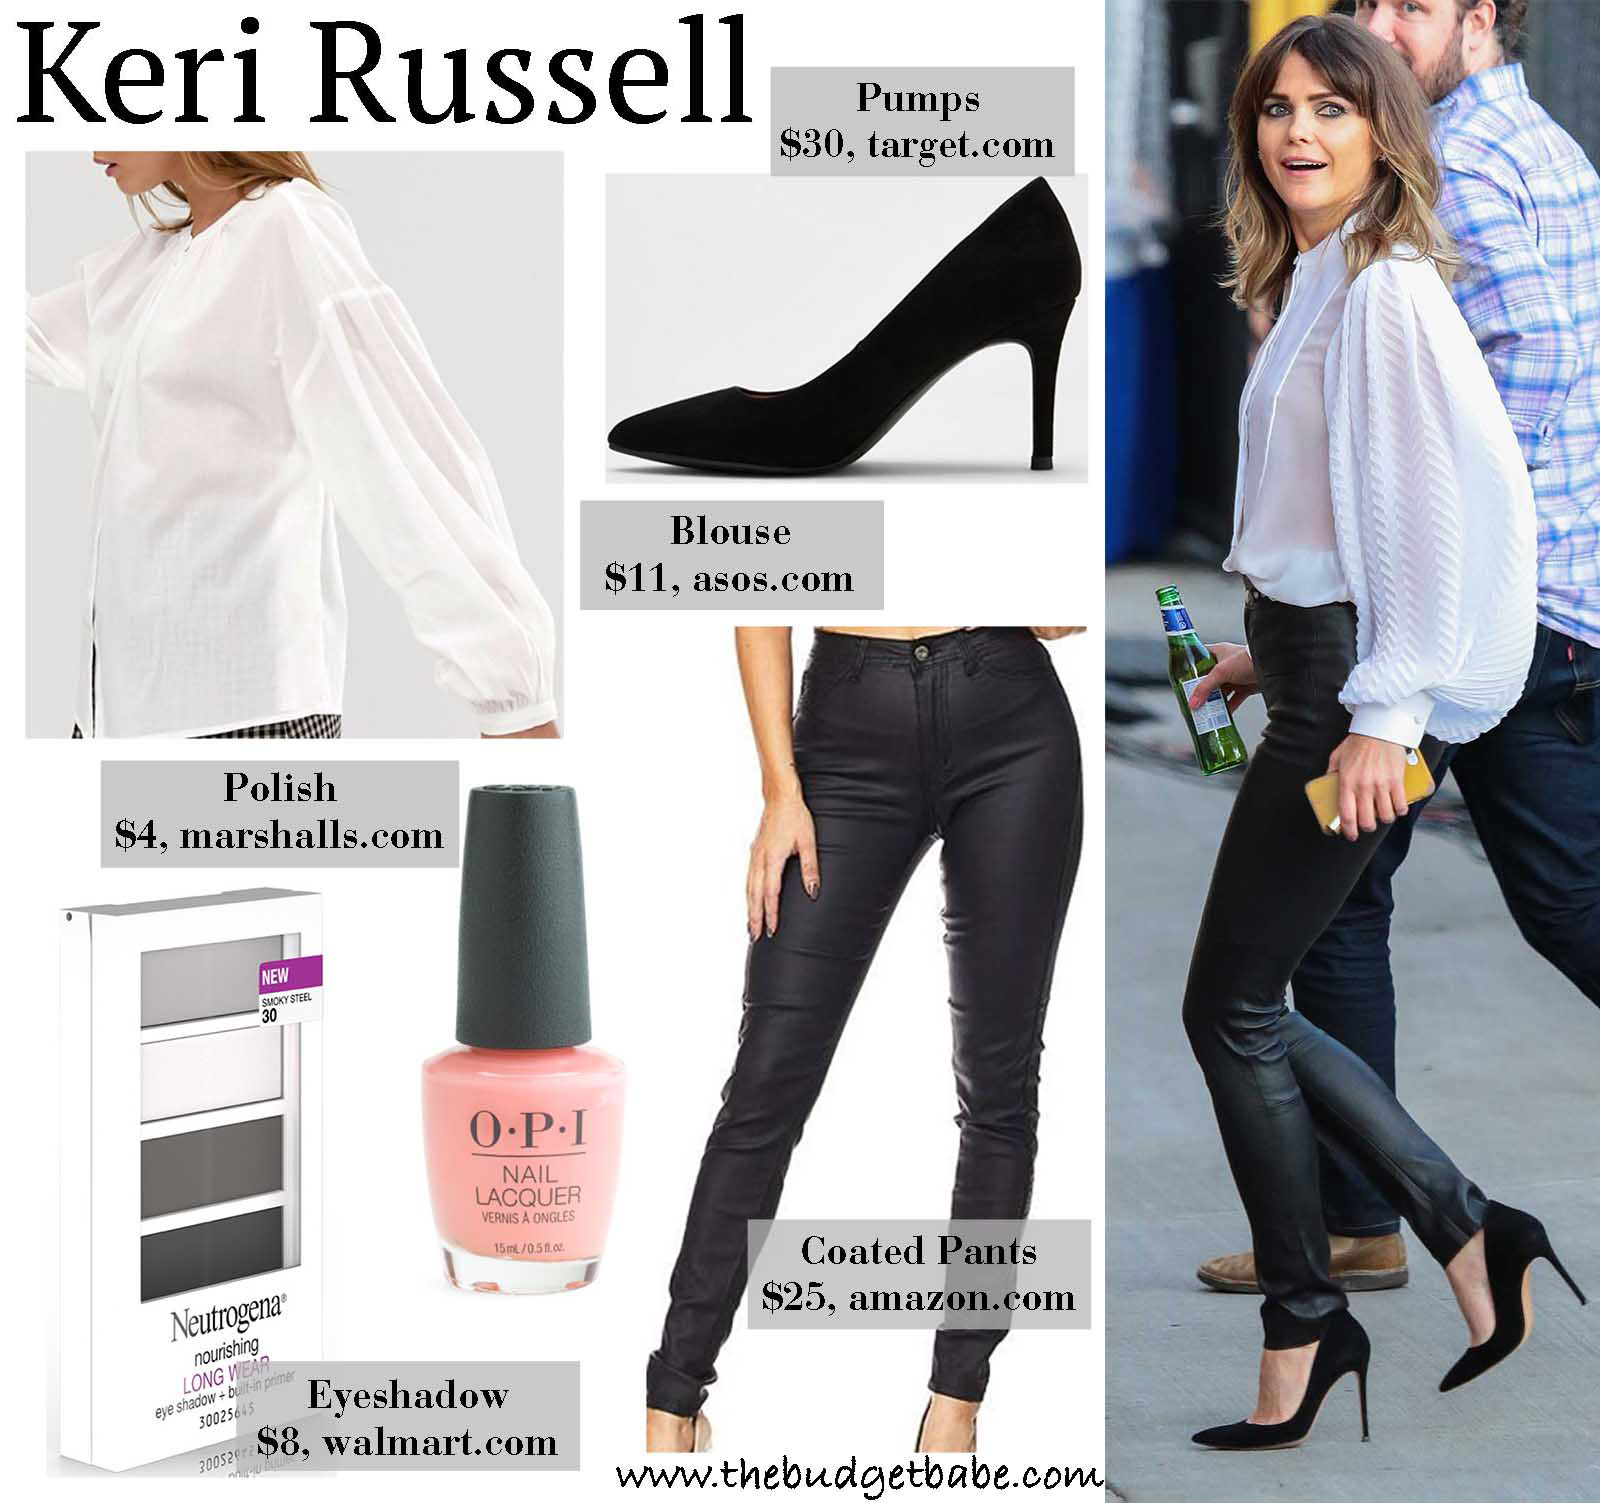 Kerri Russel's Balloon Sleeve Blouse and Leather Pants Look for Less